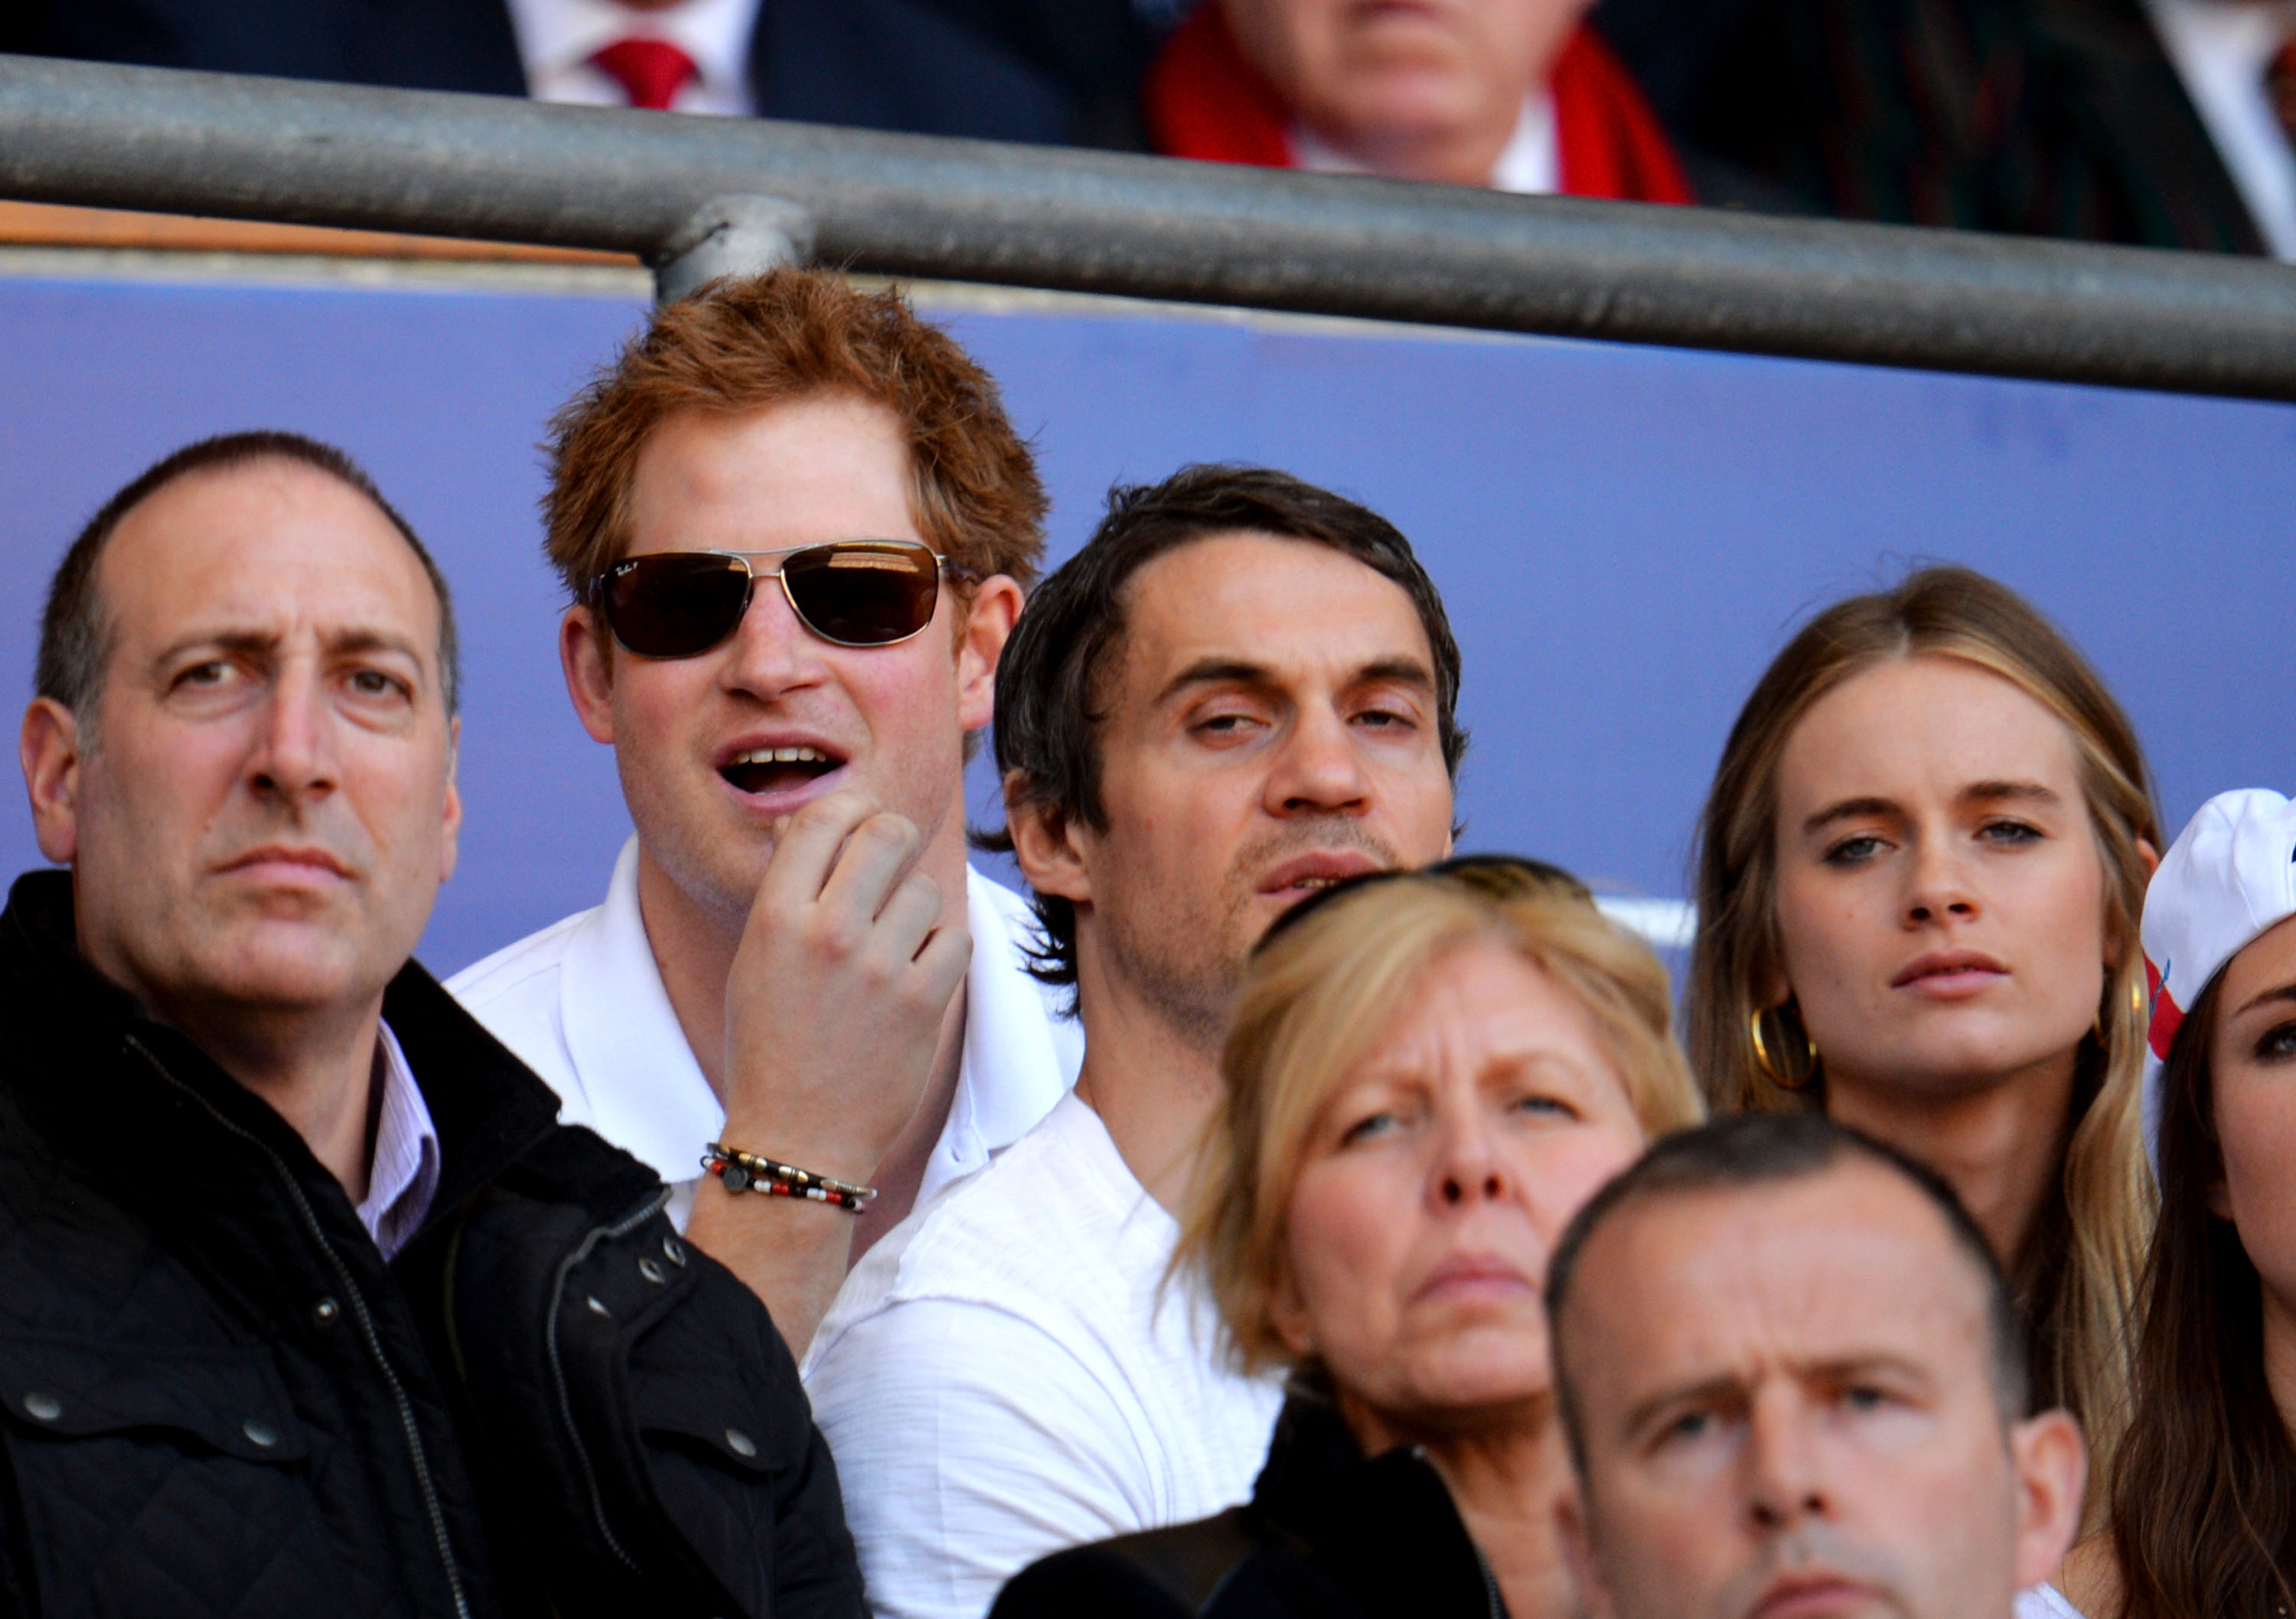 Prince Harry and Cressida Bonas look on during the RBS Six Nations match at Twickenham Stadium on March 9, 2014 in London, England. | Source: Getty Images